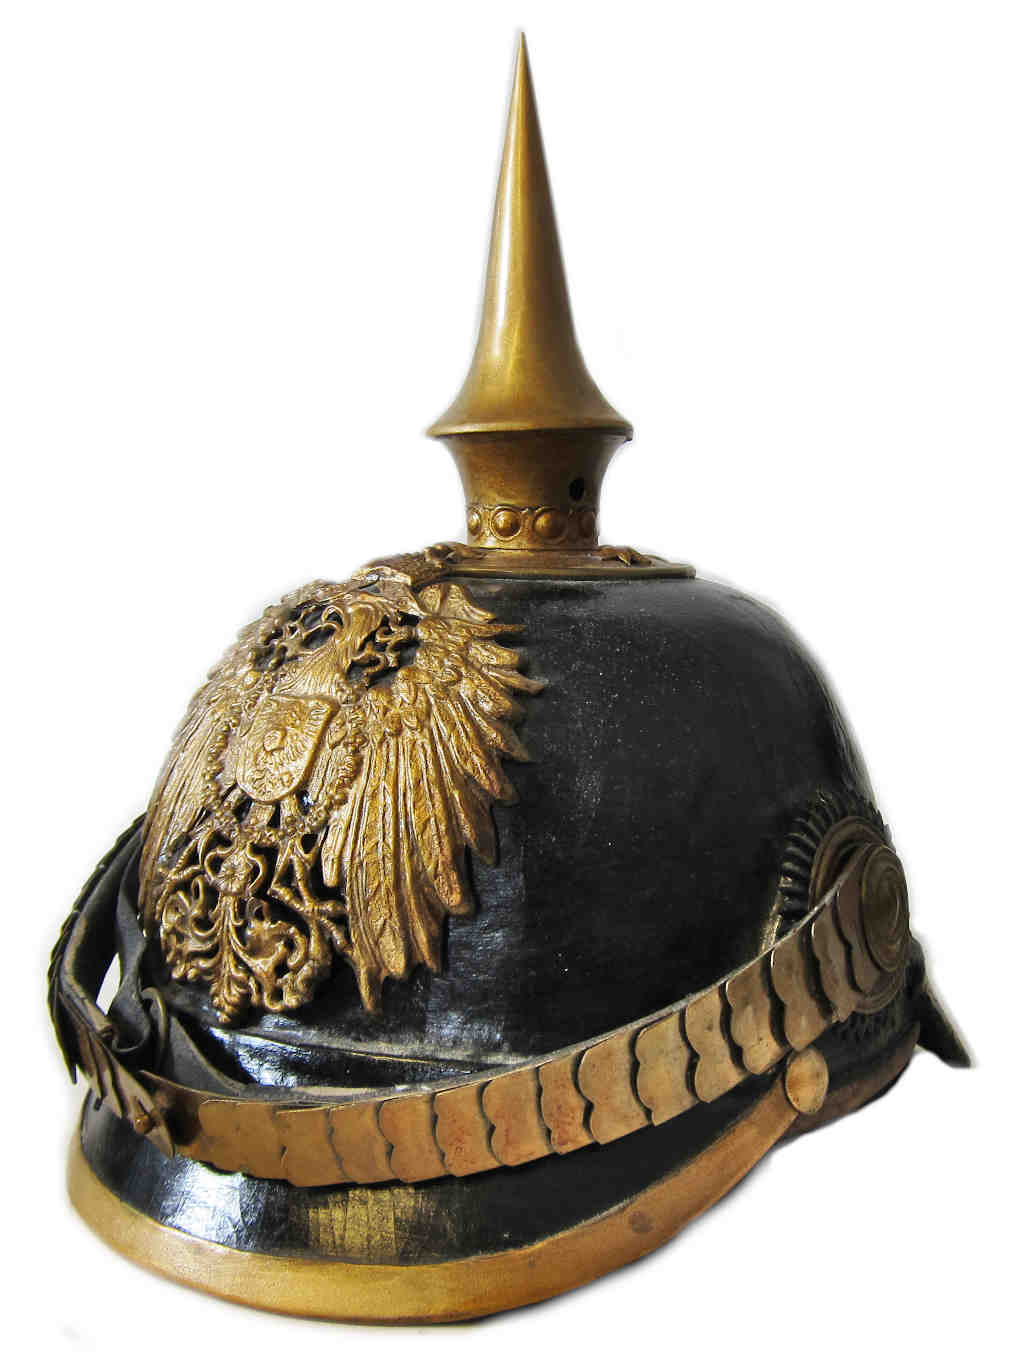 East Asian Occupation Brigade Officers Pickelhaube